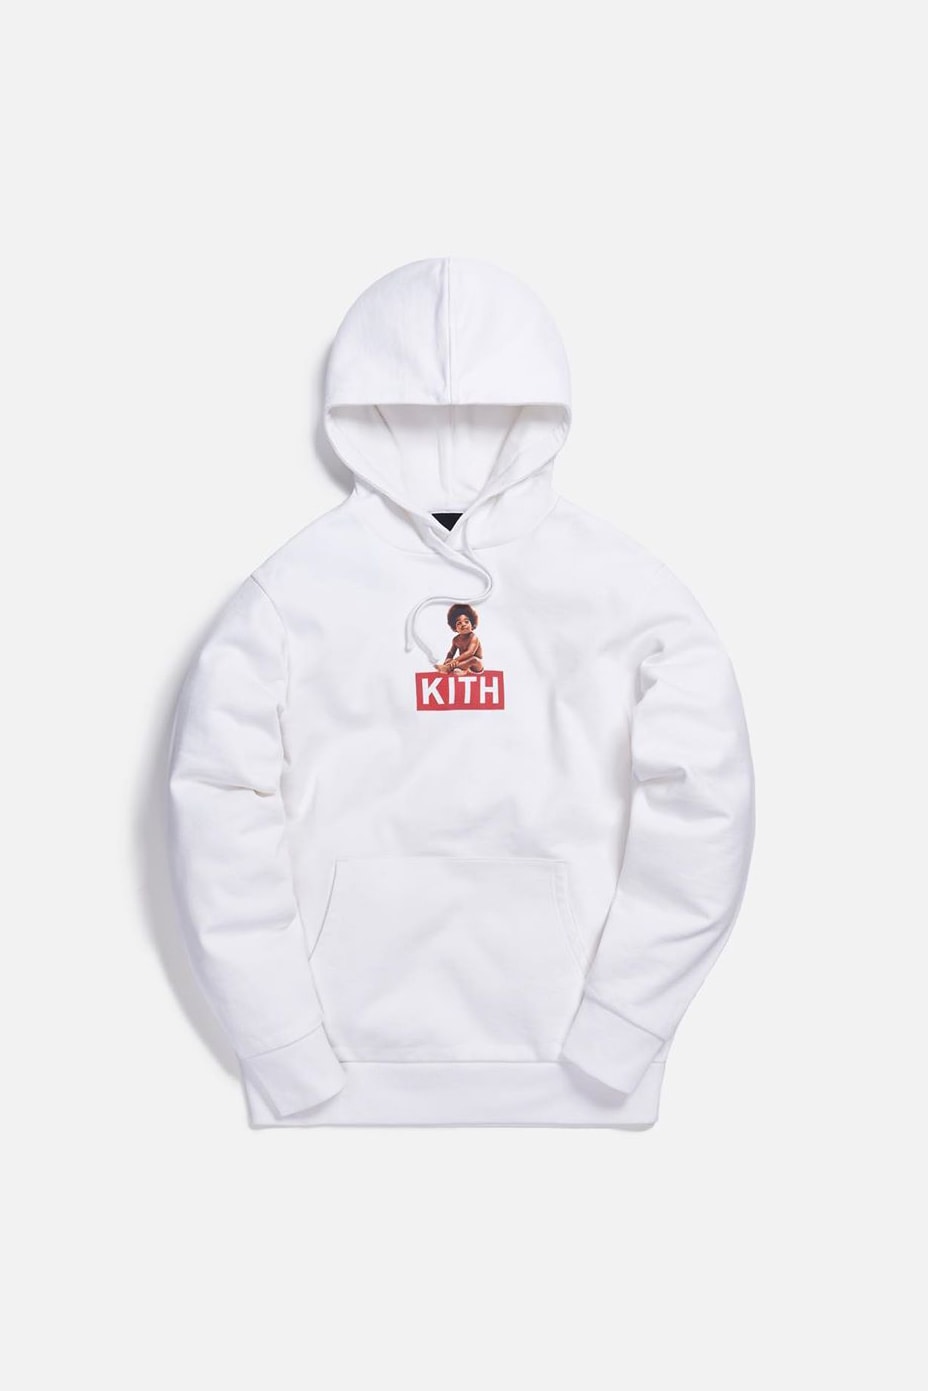 The Notorious B.I.G. KITH